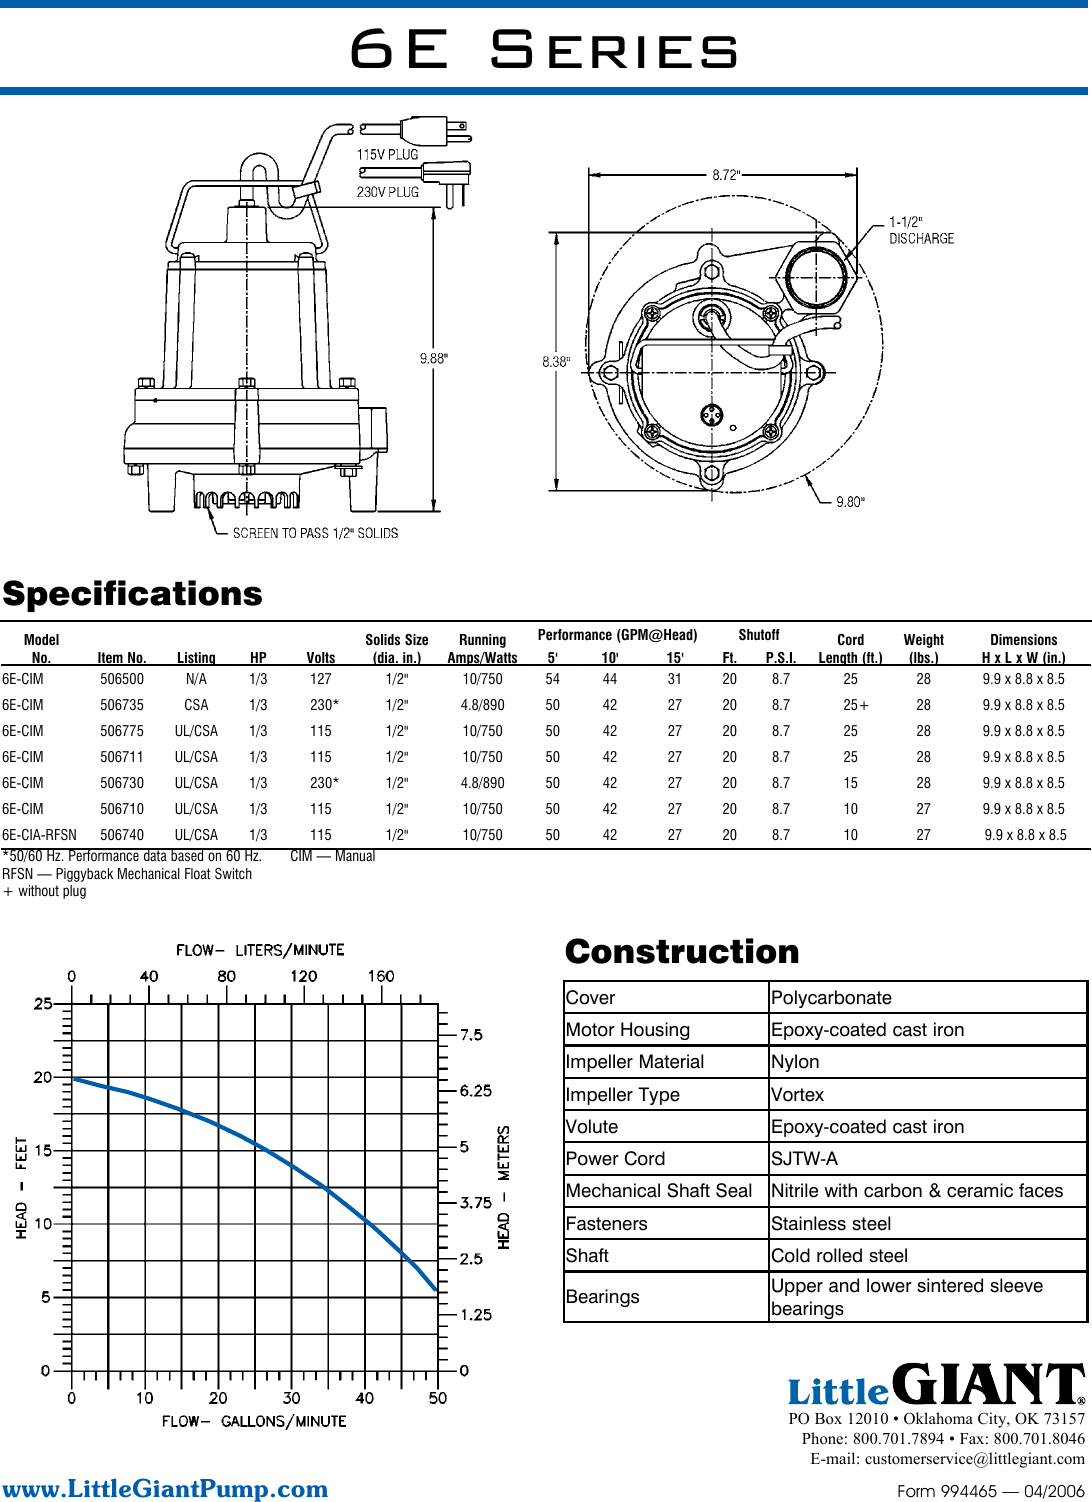 Page 2 of 2 - 18246 1 Little Giant 6E Series Submittal User Manual